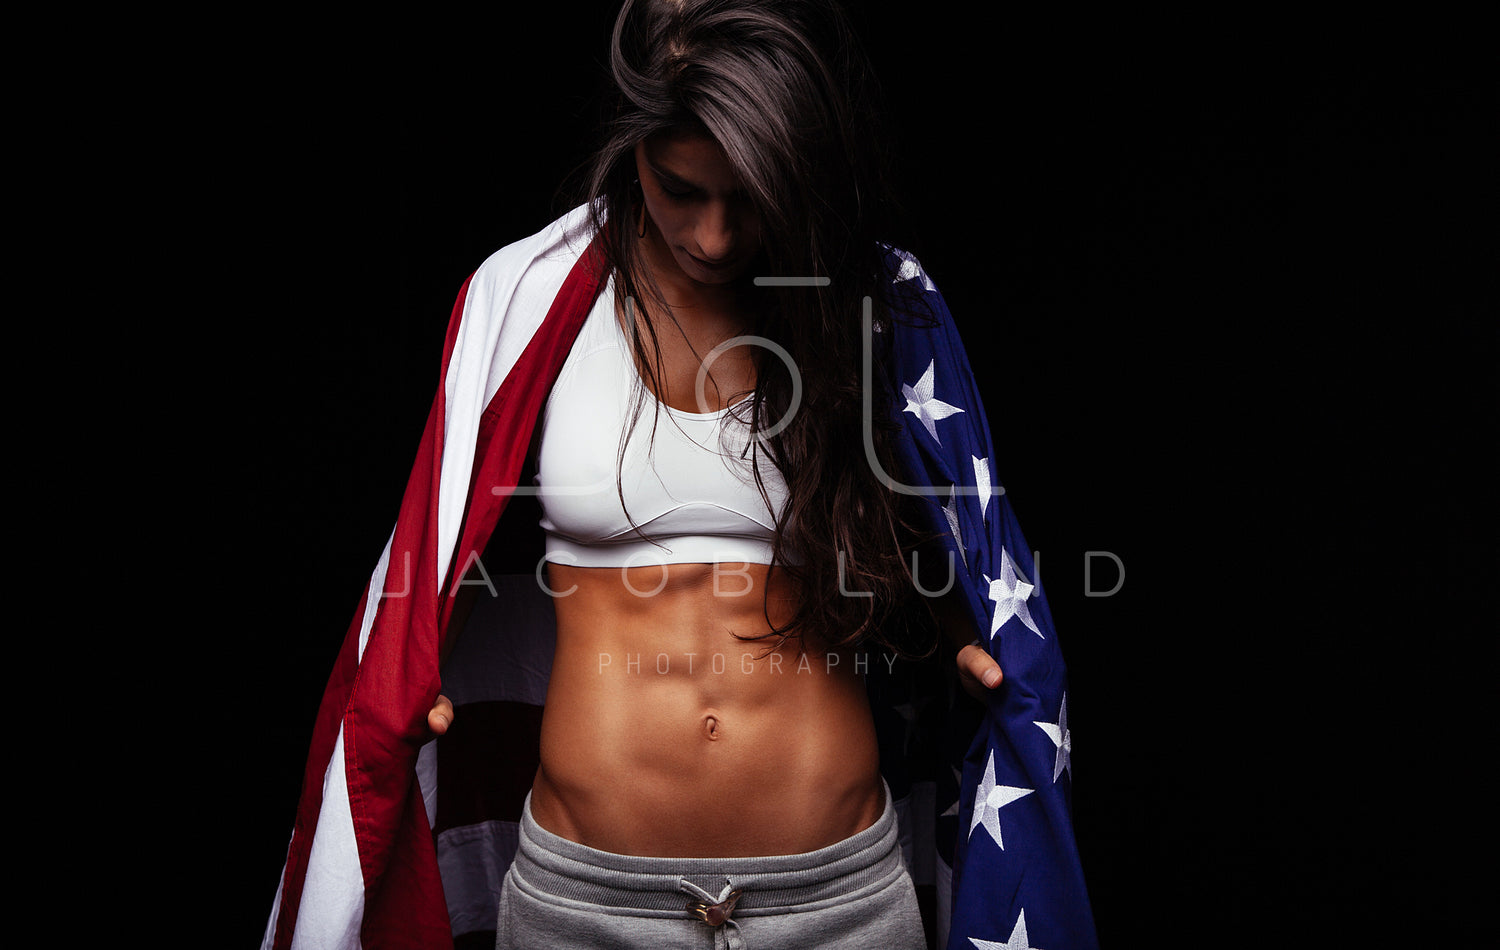 Female athlete carrying an American flag – Jacob Lund Photography